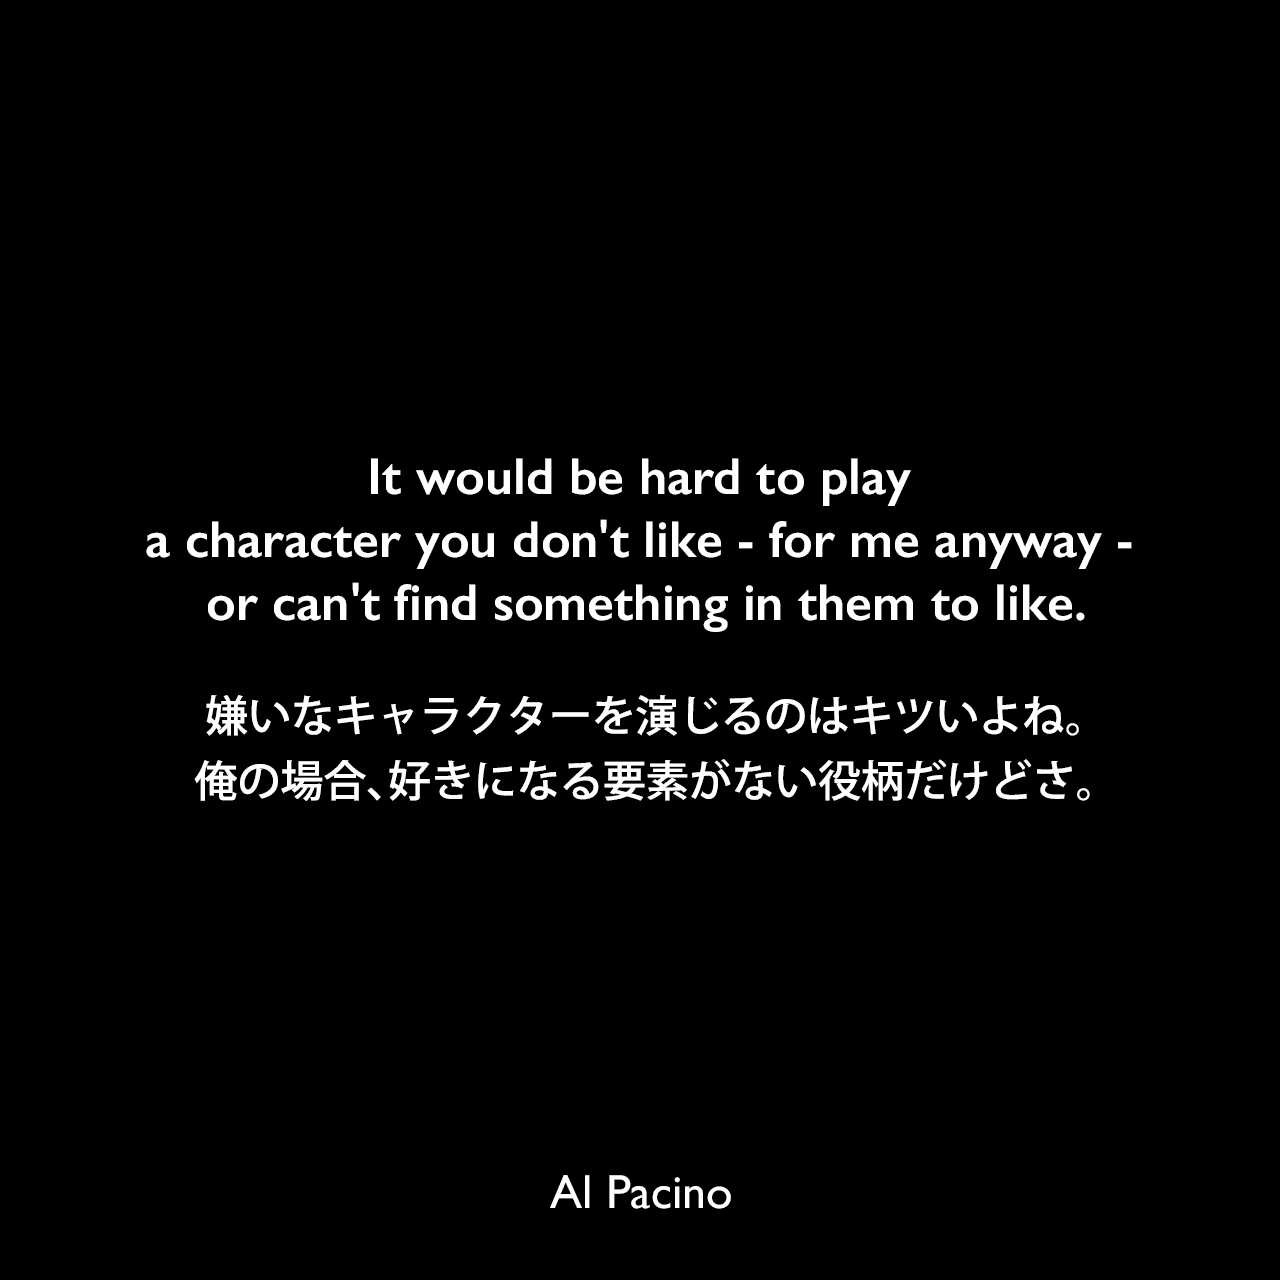 It would be hard to play a character you don't like - for me anyway - or can't find something in them to like.嫌いなキャラクターを演じるのはキツいよね。俺の場合、好きになる要素がない役柄だけどさ。Al Pacino